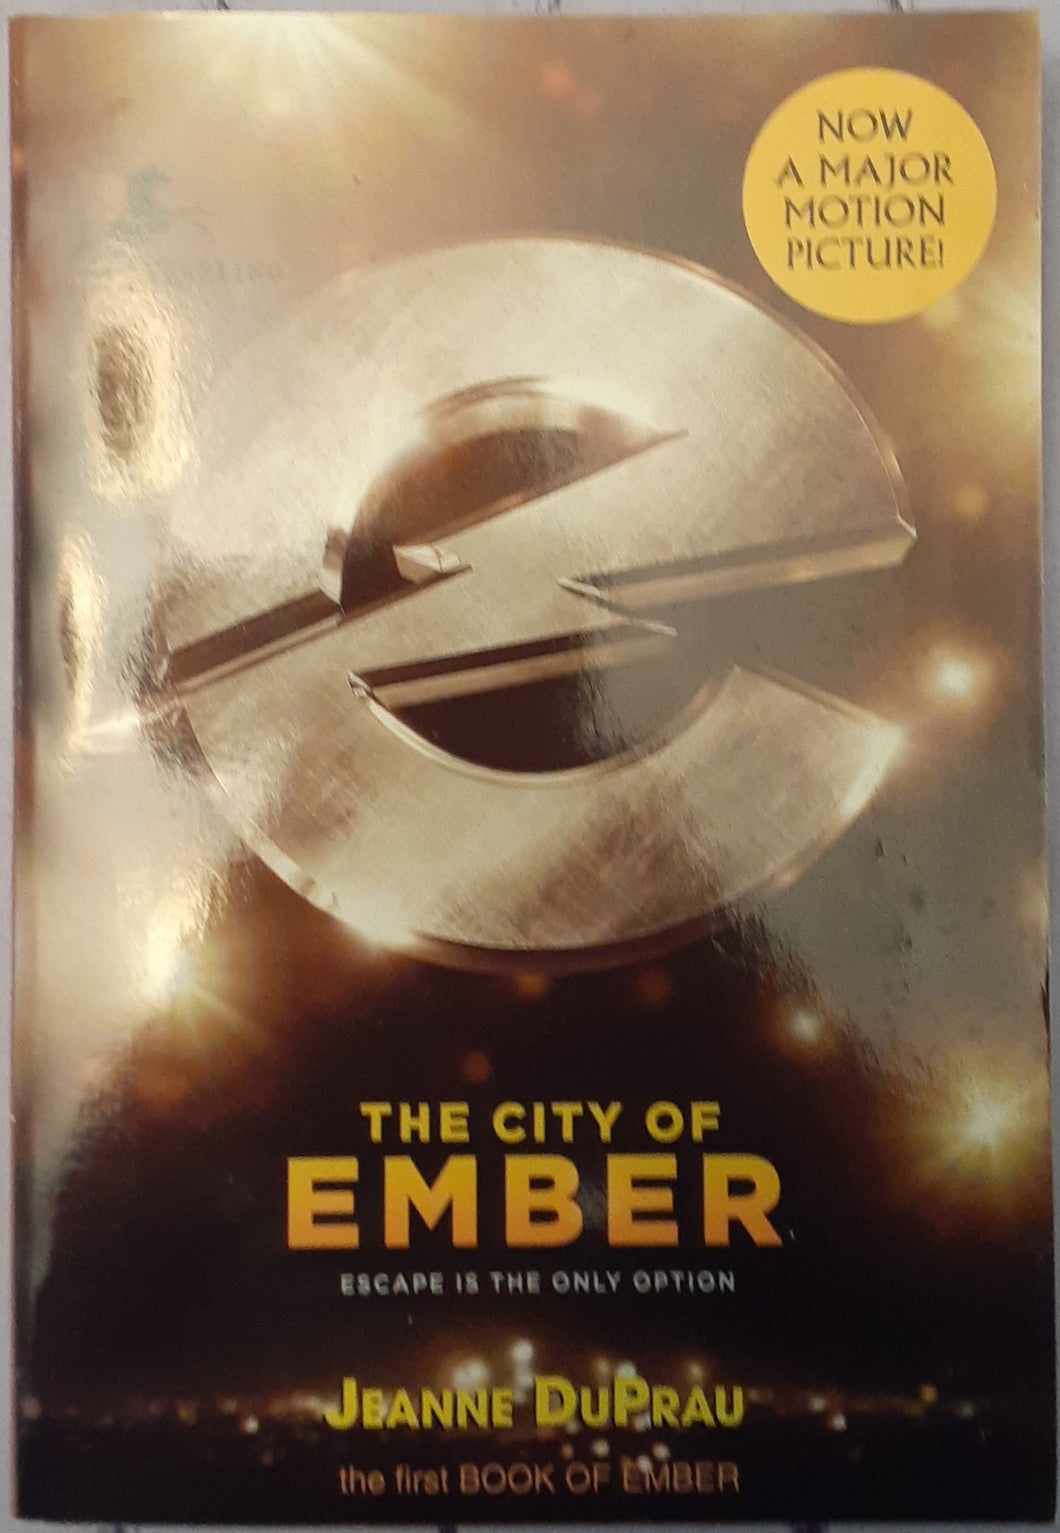 The City of Ember - Escape is the Only Option